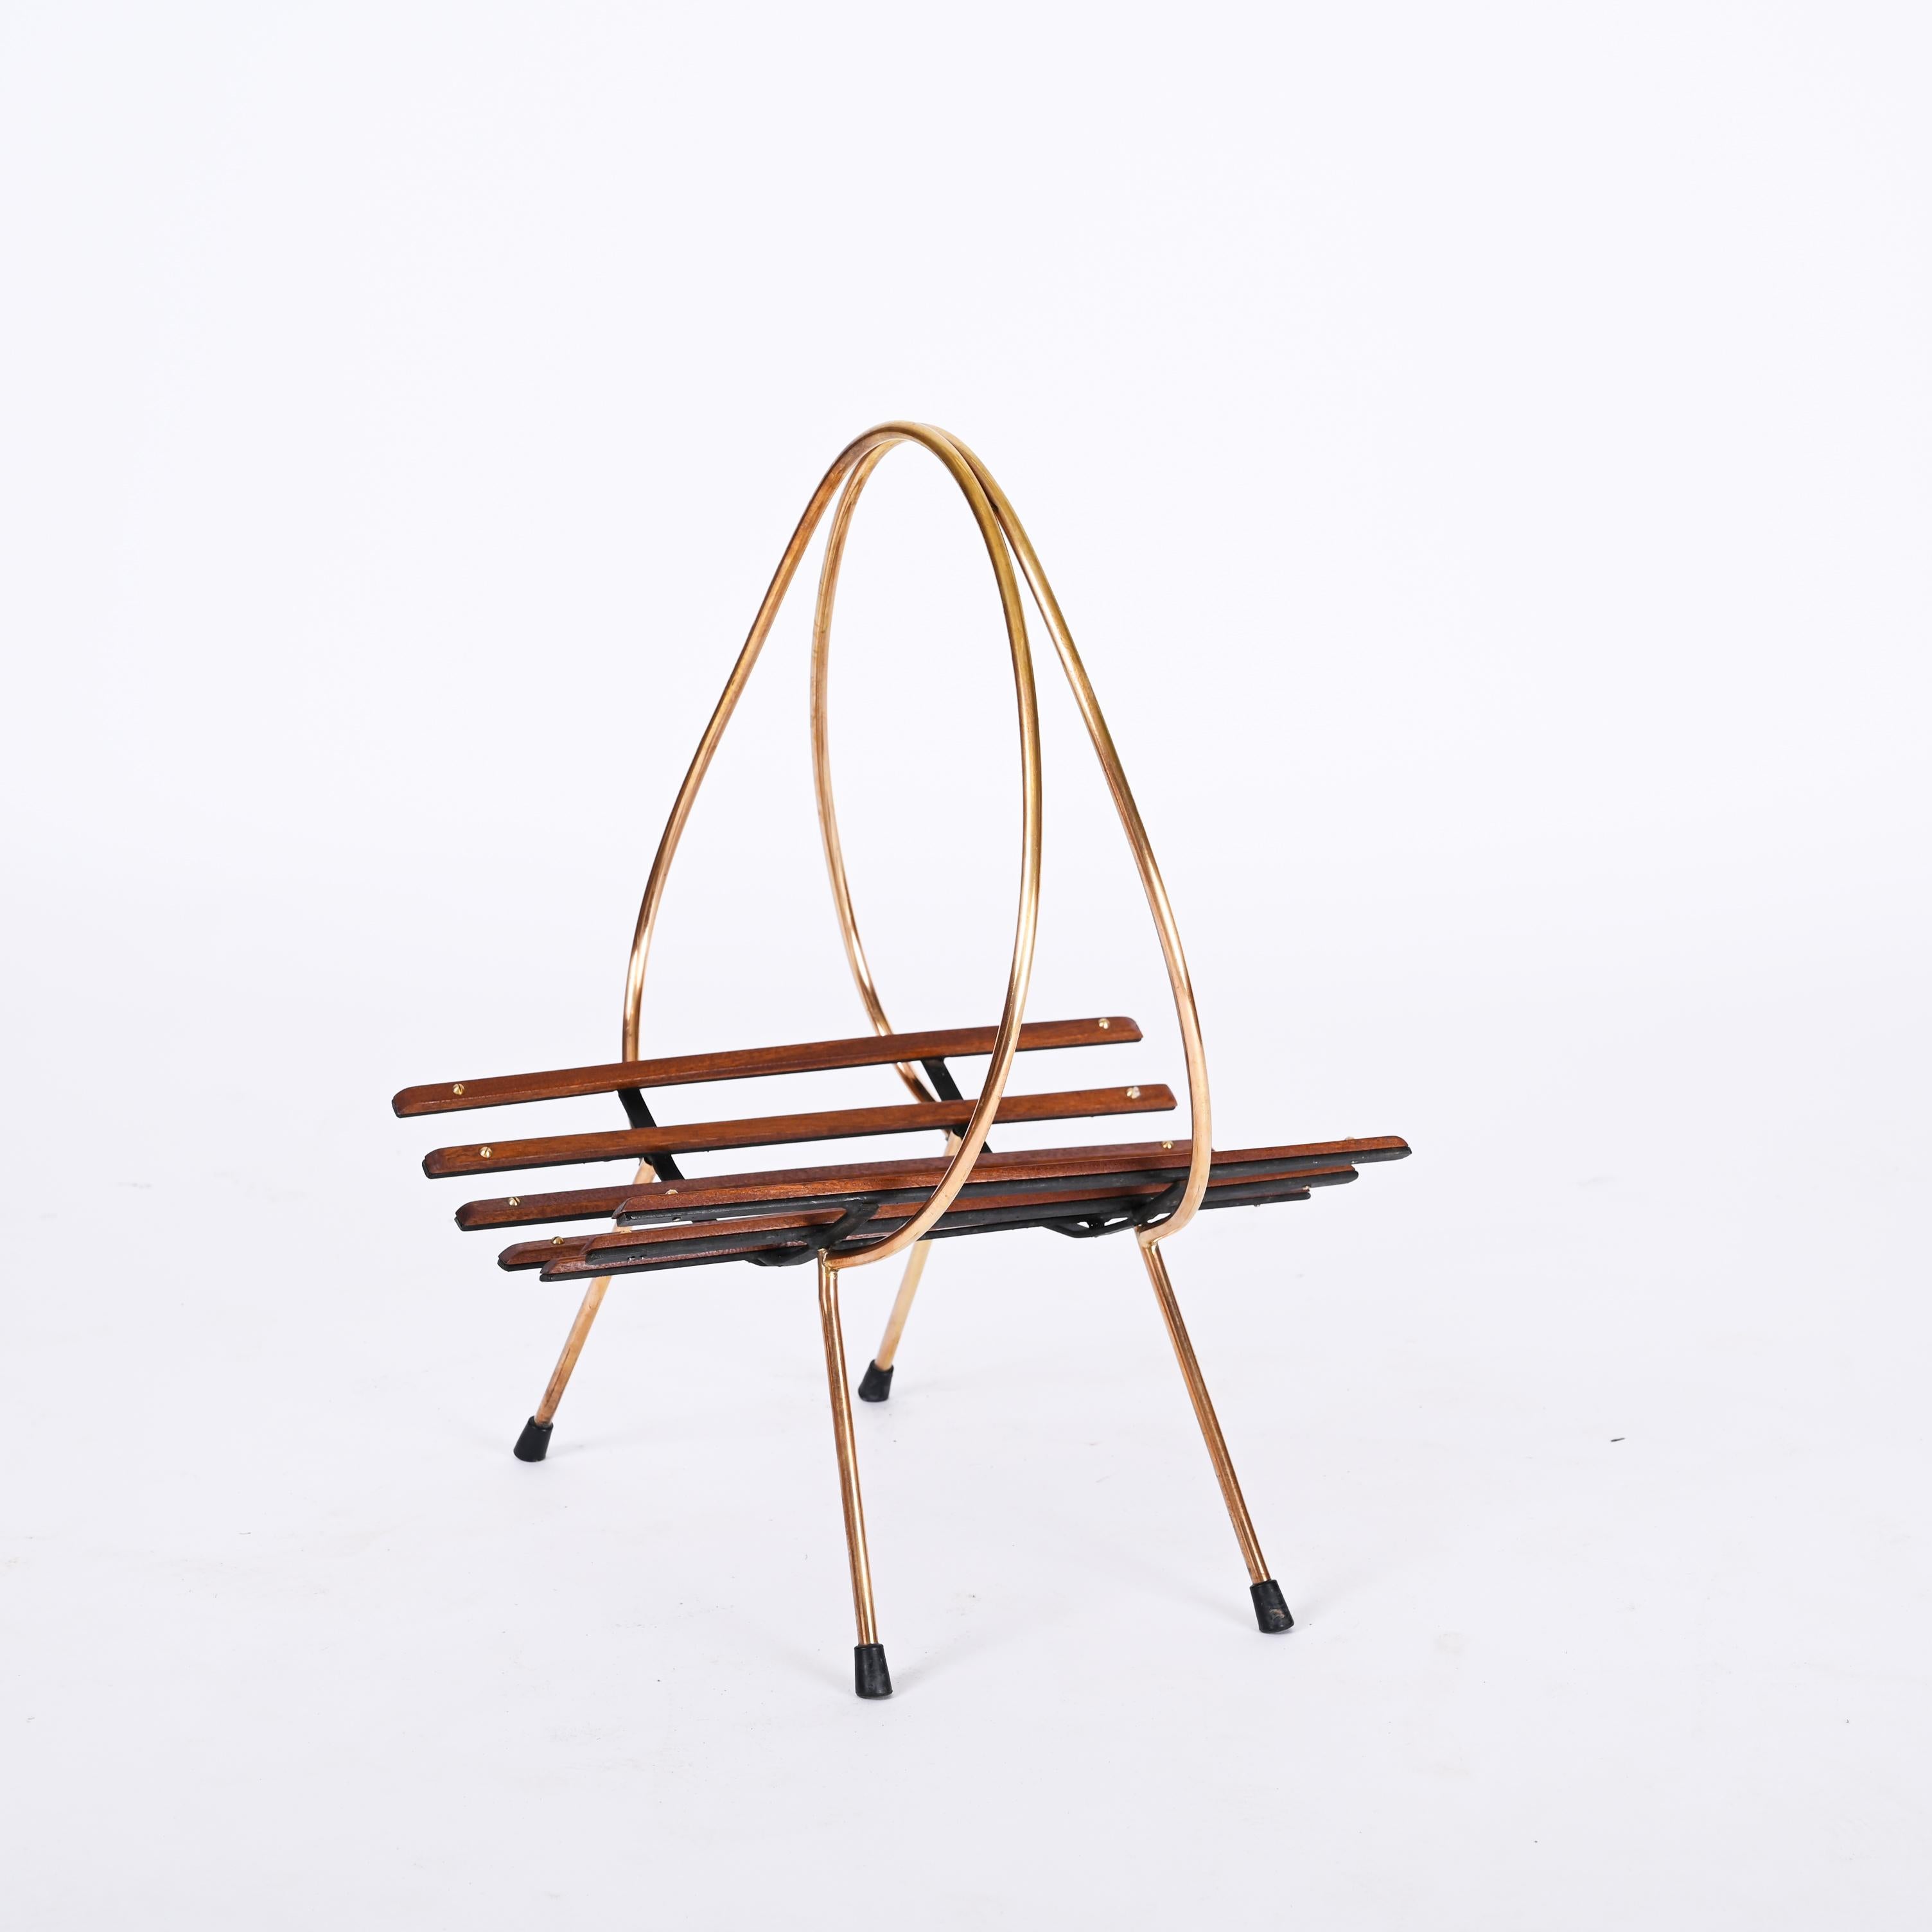 Beautiful and unique mid-century magazine rack in metal, teak and brass. This fantastic piece was produced in Italy during the 1960s.

The item is lovely as it has a gilded metal and brass structure and wood teak boards, working as a base for the